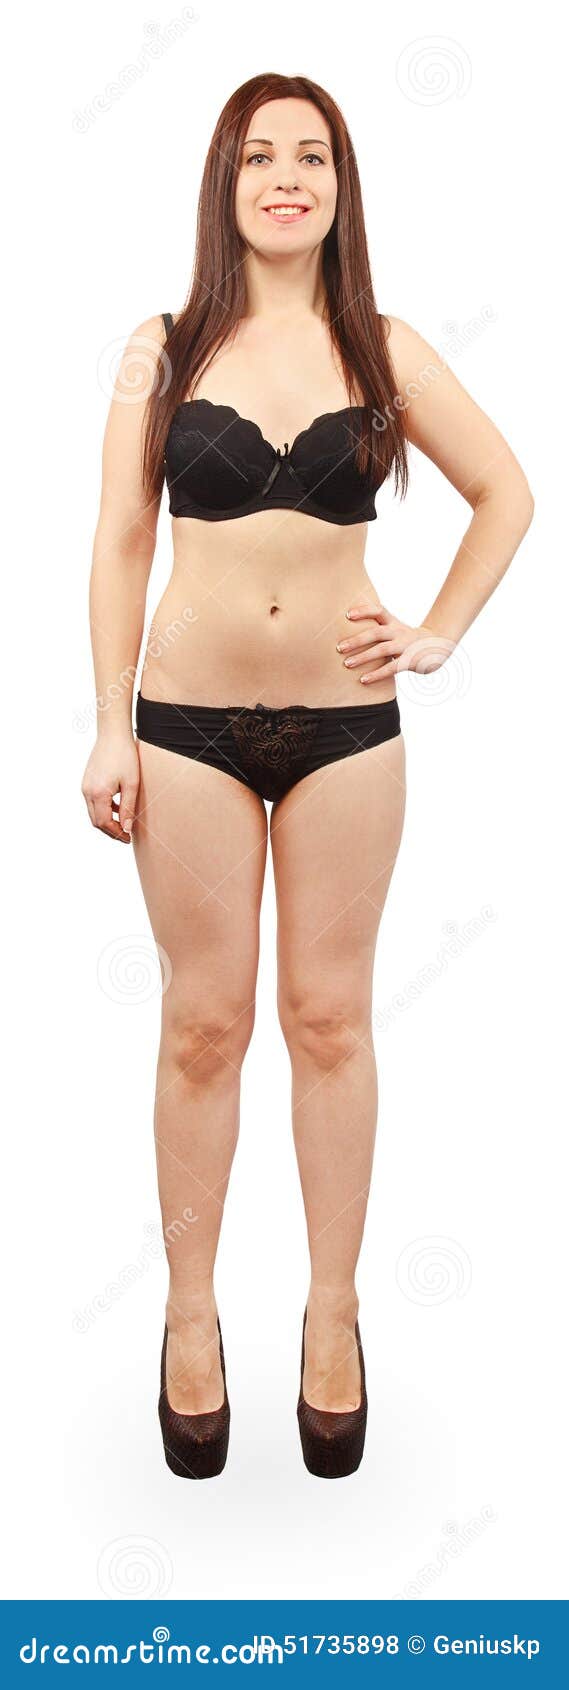 Download Front View Of Full Body Smiling Woman With Black Underwear ...